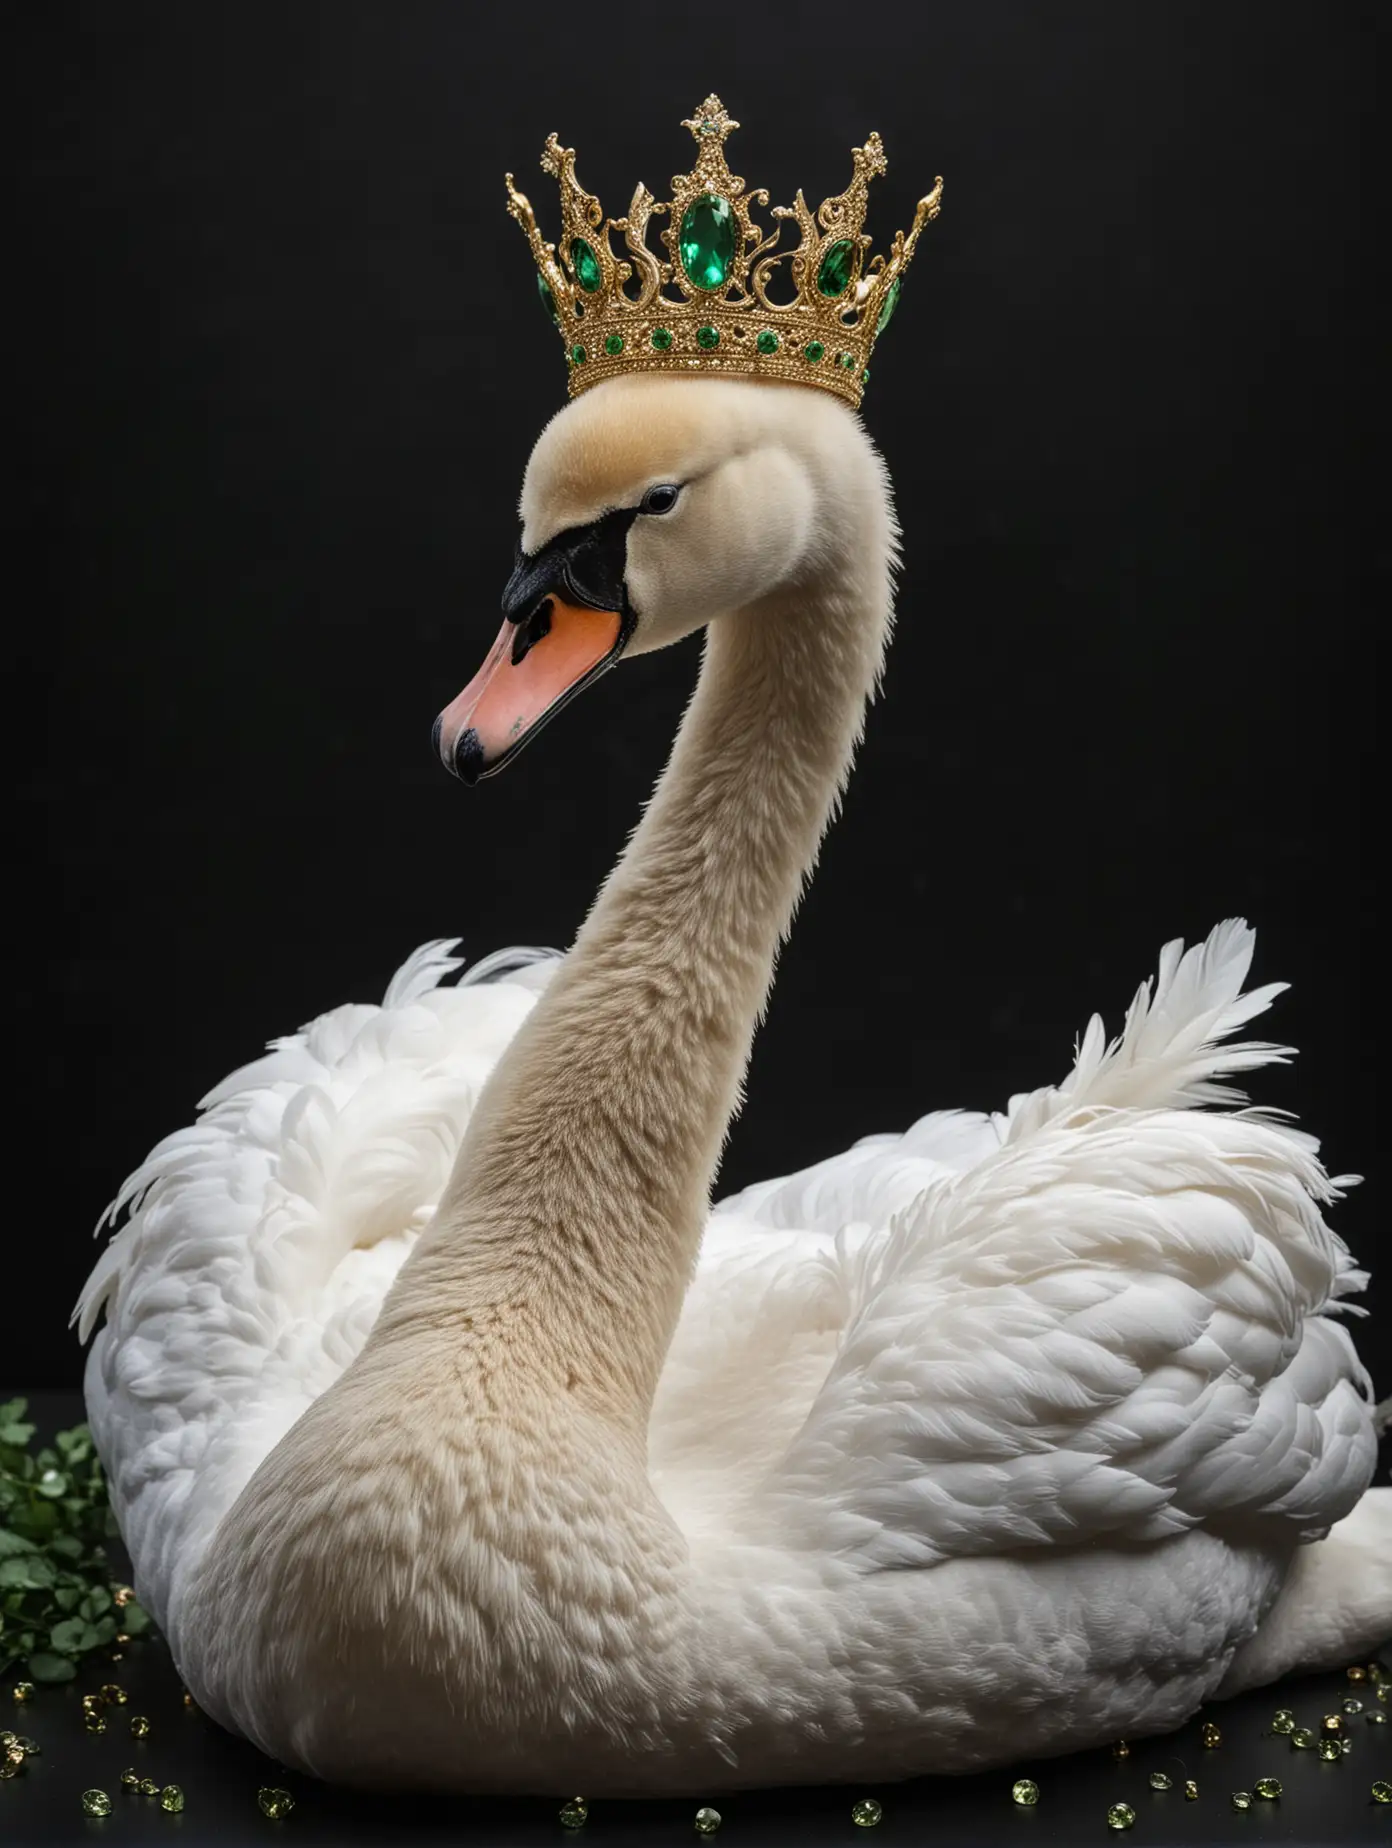 White swan with gold crown and green jewels, black background